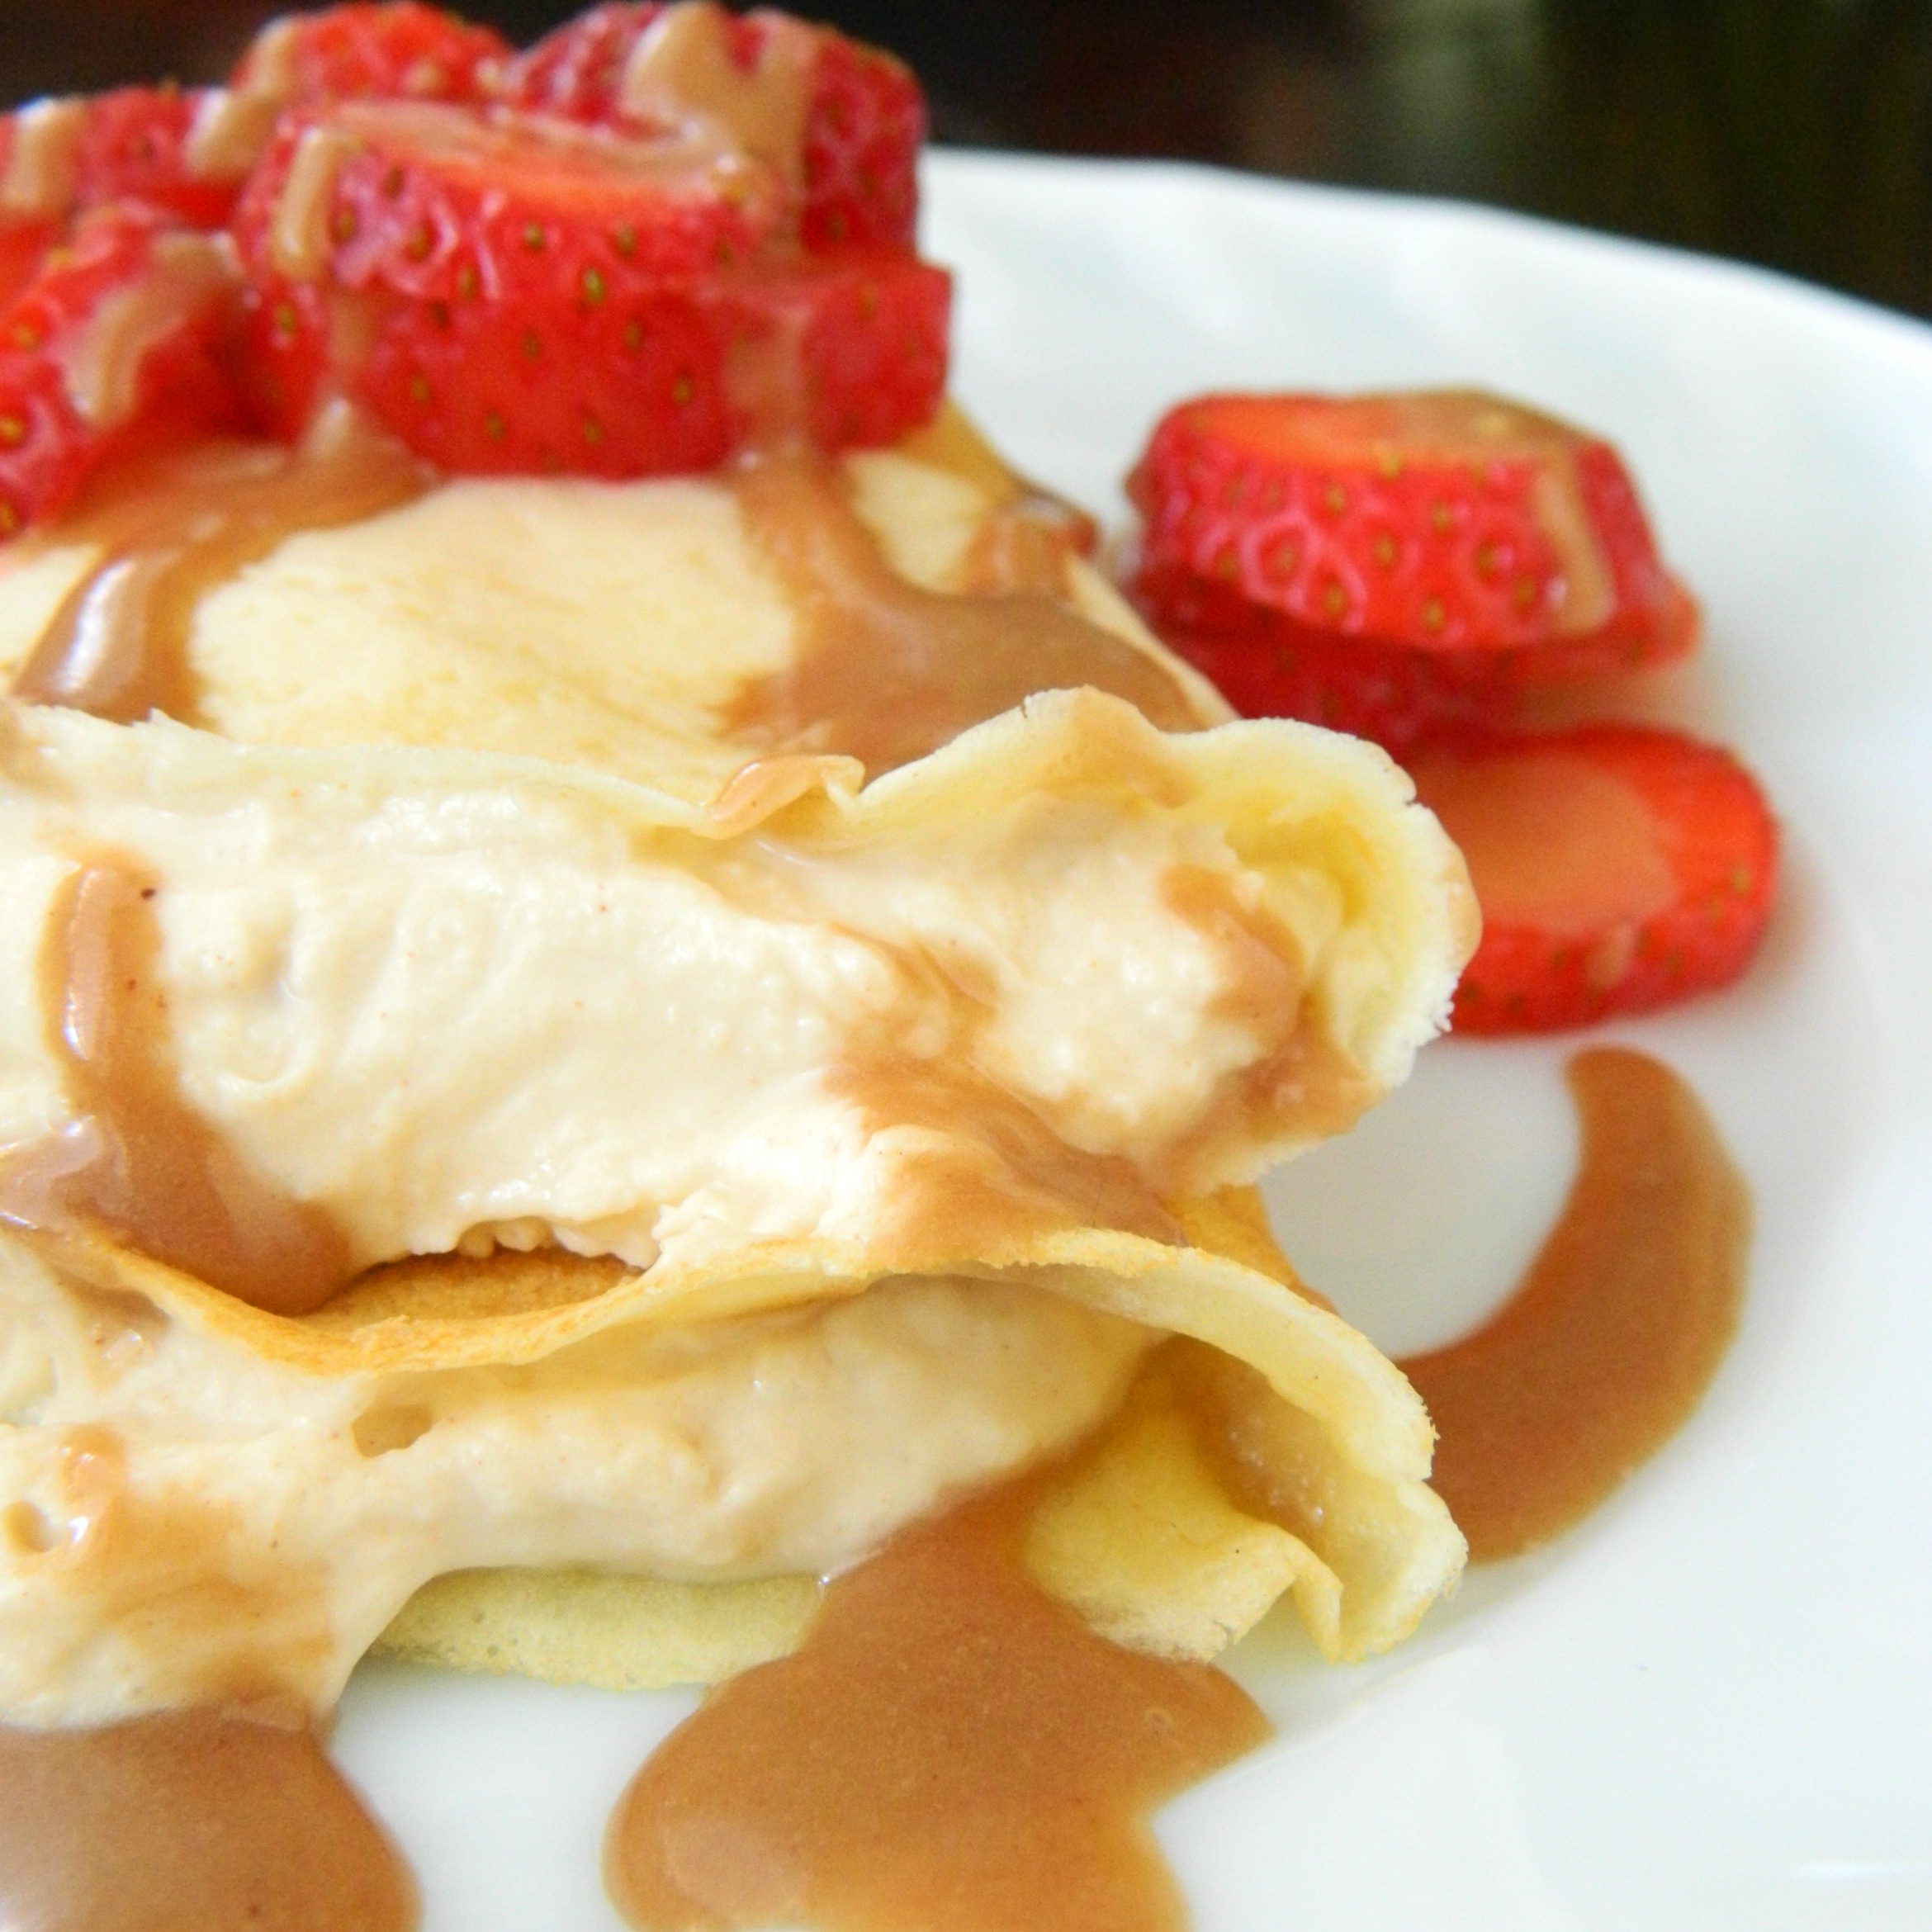 Peanut Butter Cream Filled Crepes